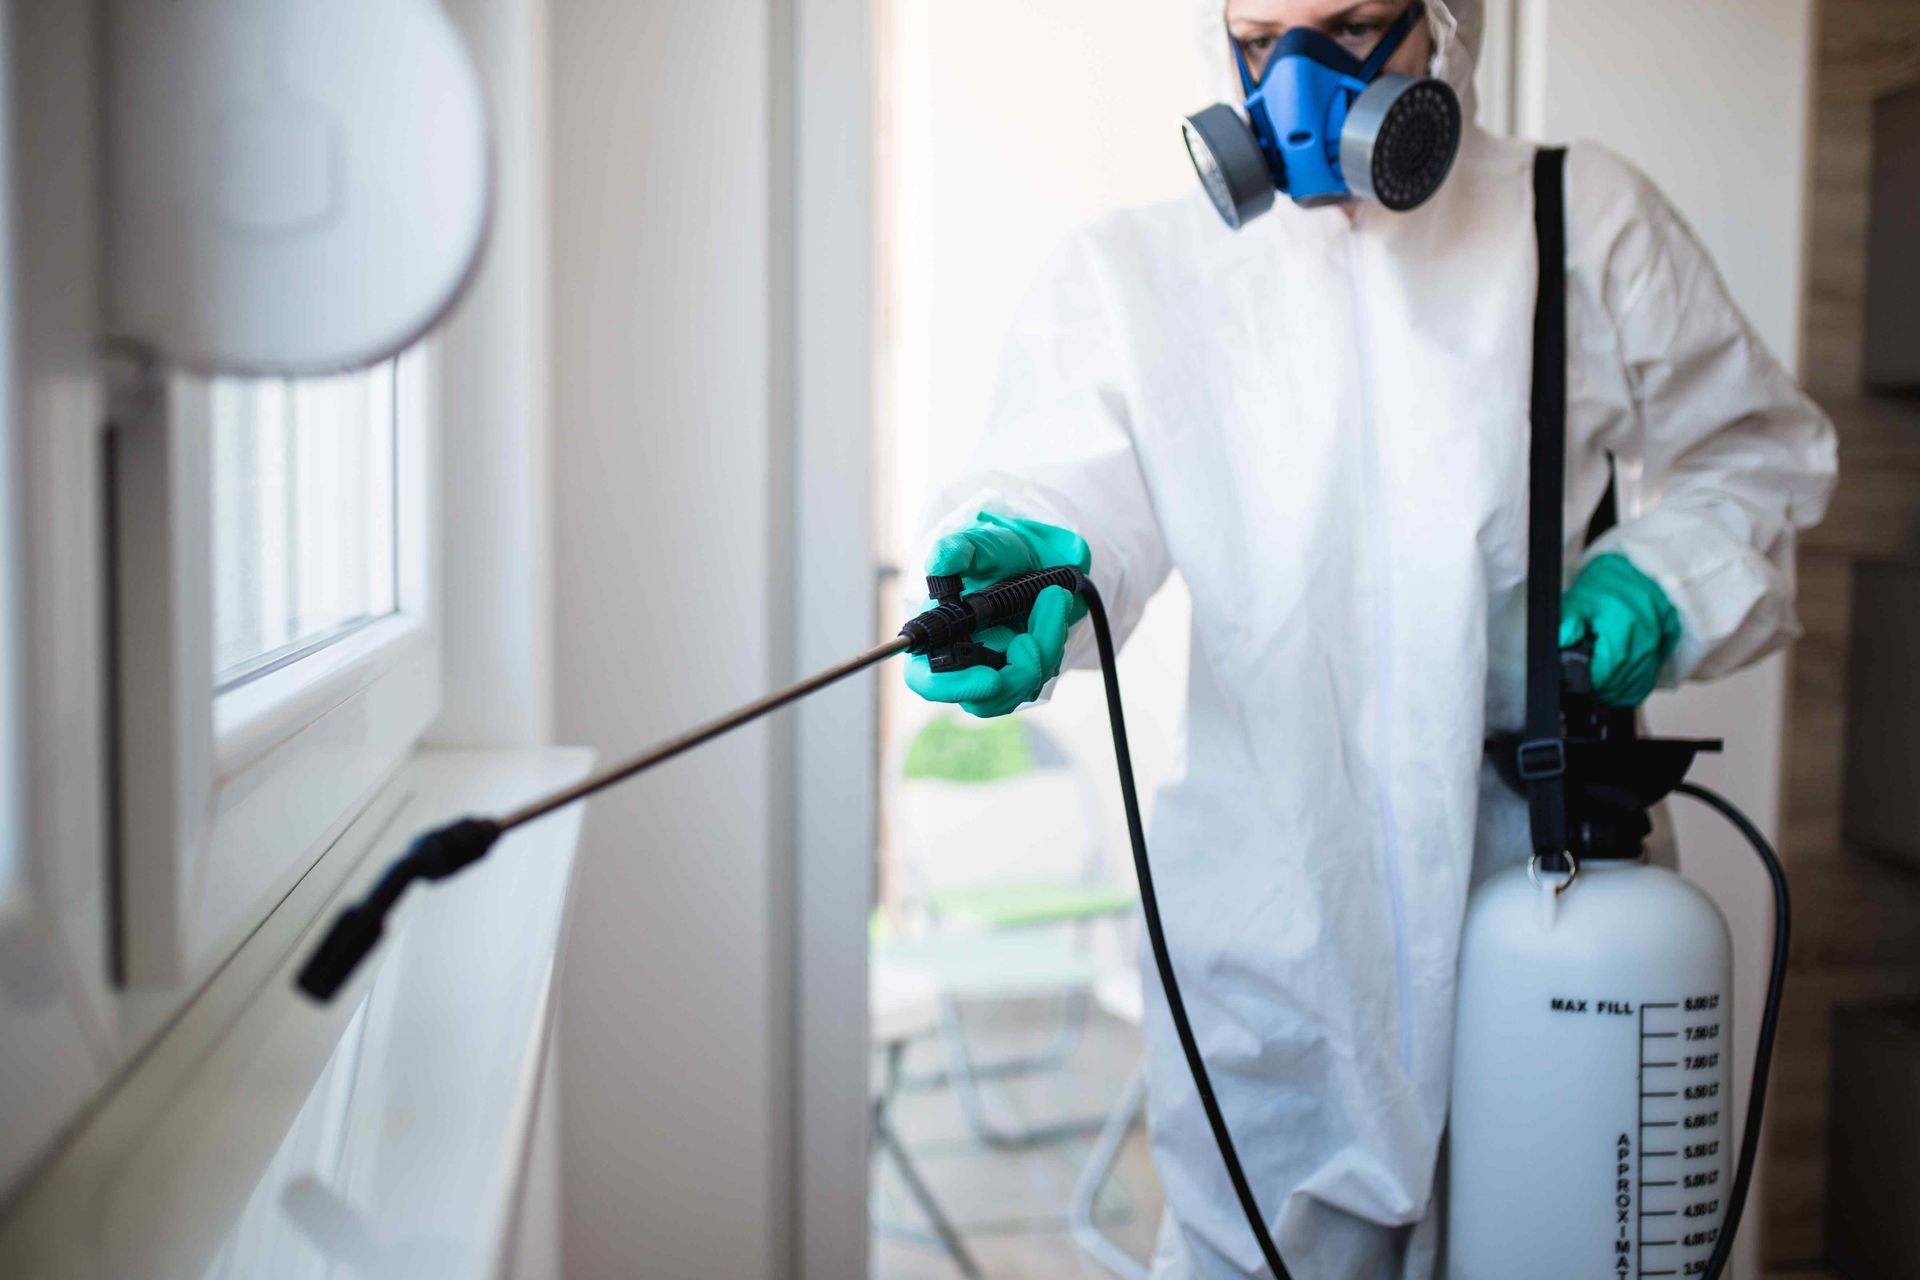 exterminator spraying windowsill with insecticide